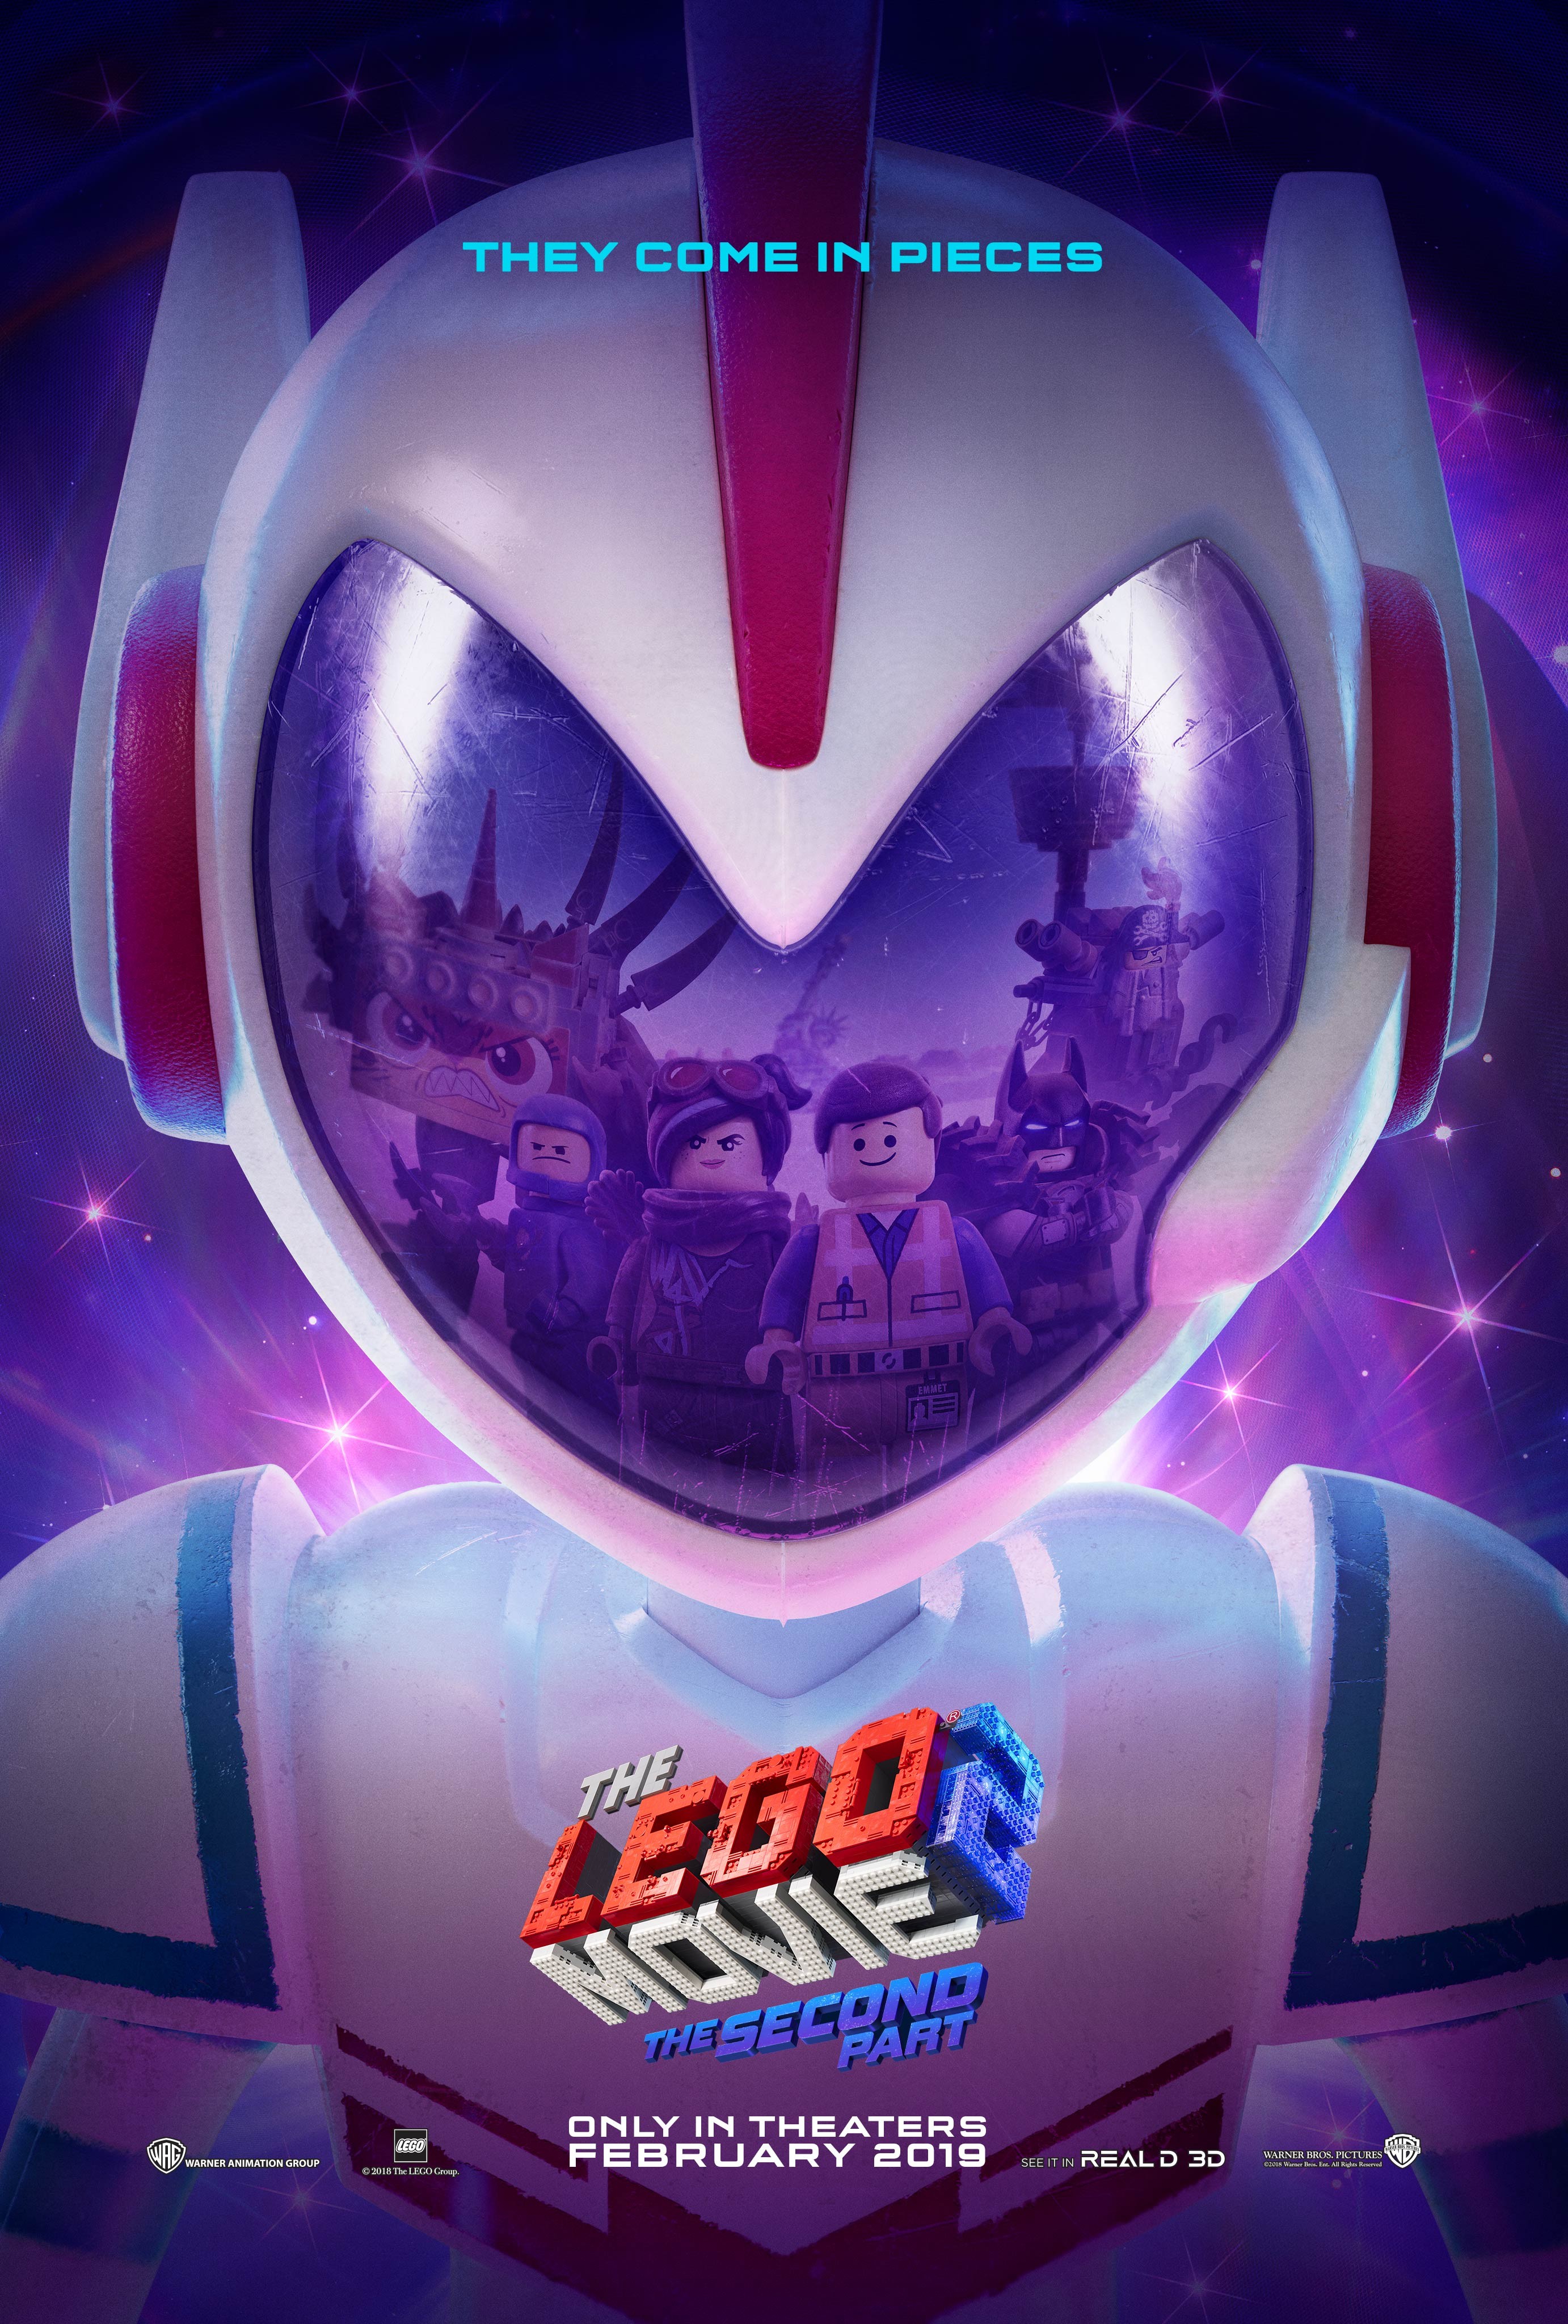 Rotten Tomatoes - The LEGO Movie 2 is Certified Fresh at